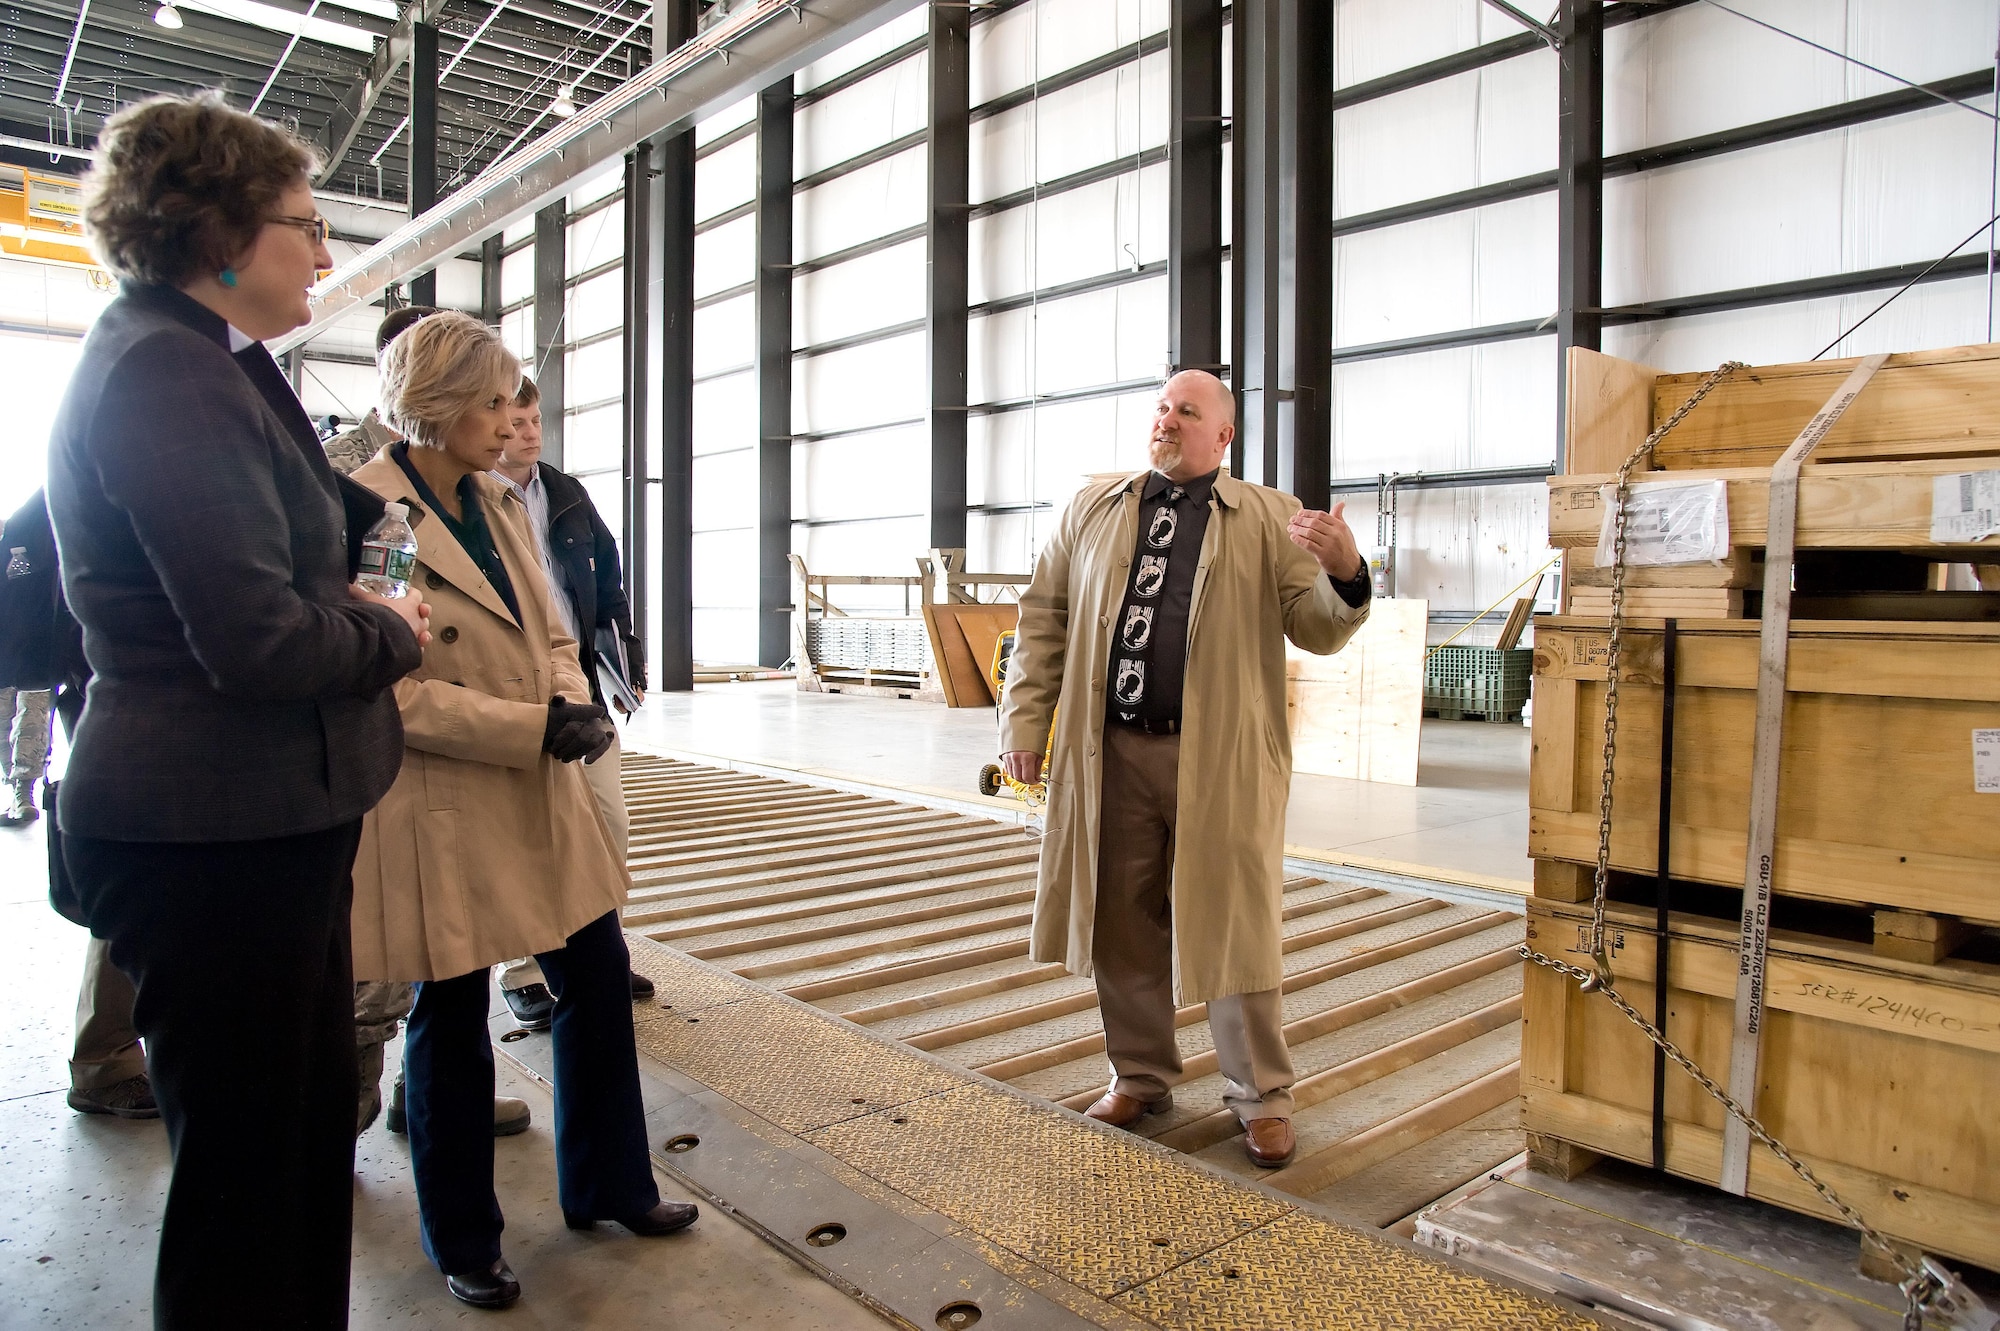 Dr. Donna Senft, Air Mobility Command chief scientist, left, and Sara Keller, AMC Logistics, Engineering, Force Protection deputy director, both assigned to Scott Air Force Base, Ill., listen to Jim Ewing, 436th Aerial Port Squadron operations manager, explain pallet build up and processing of oversized cargo by aerial port personnel Feb. 7, 2017, at Dover Air Force Base, Del. Senft and Keller were part of AMC’s “Aerial Port of the Future” study team that observed practices and procedures used by Super Port personnel. (U.S. Air Force photo by Roland Balik)